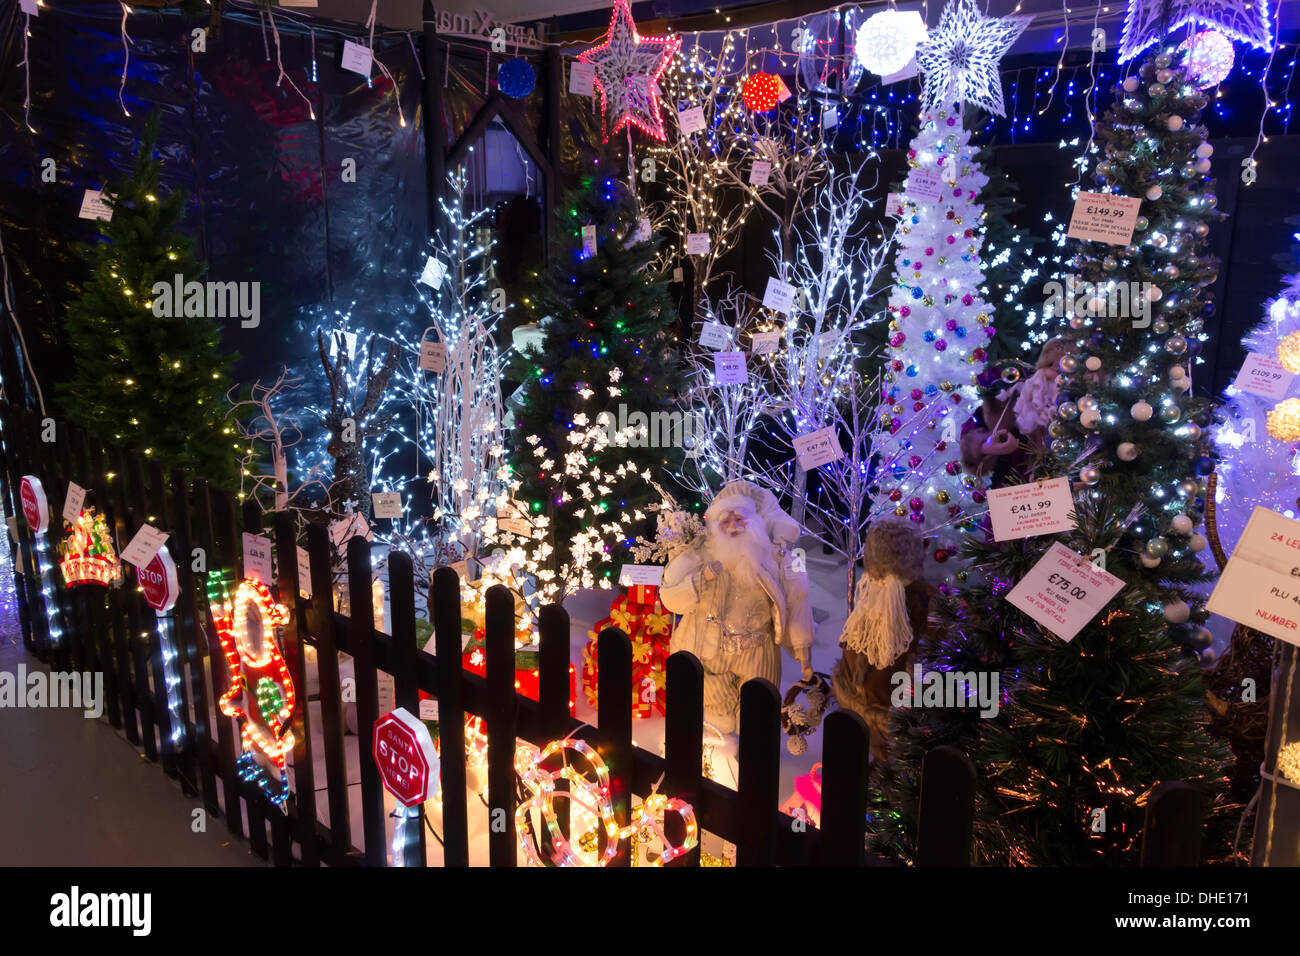 Display of illuminated Christmas Decorations for sale in a garden ...